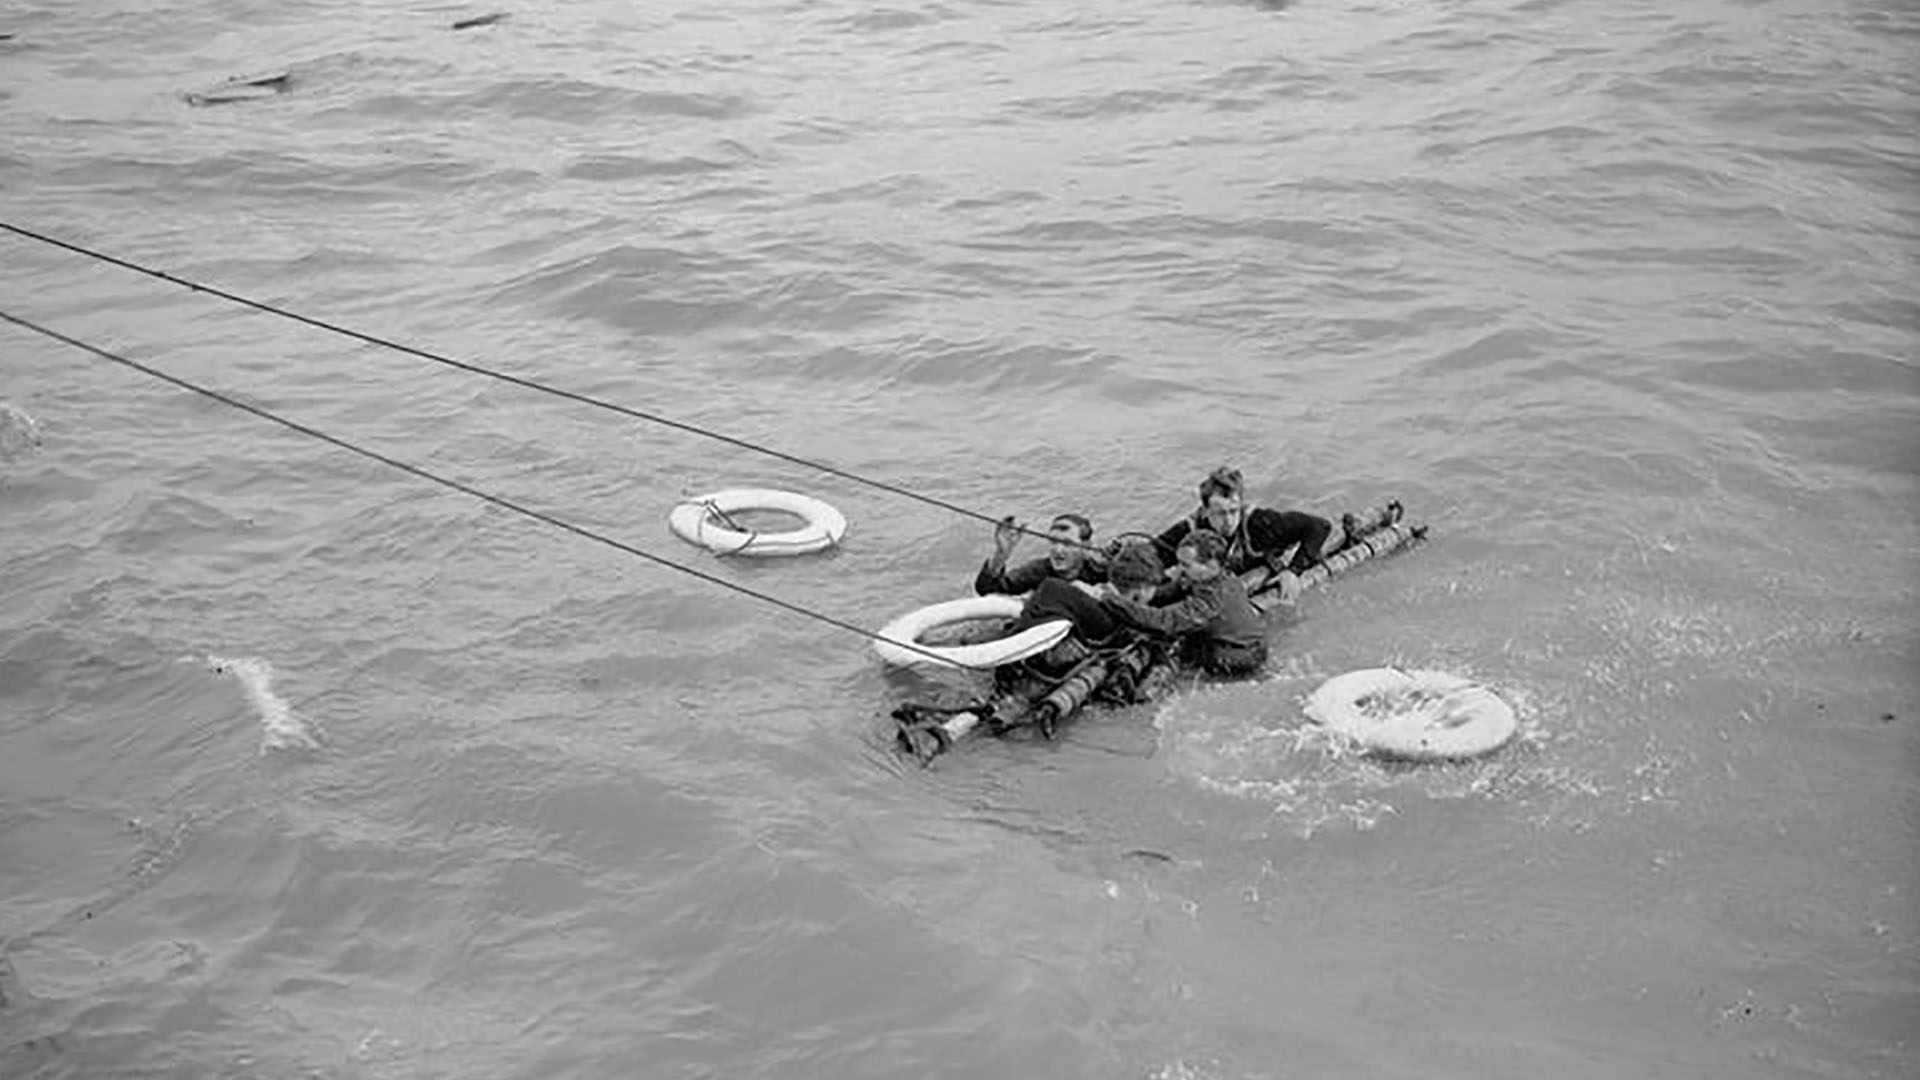 Royal Navy rescue during Operation Infatuate